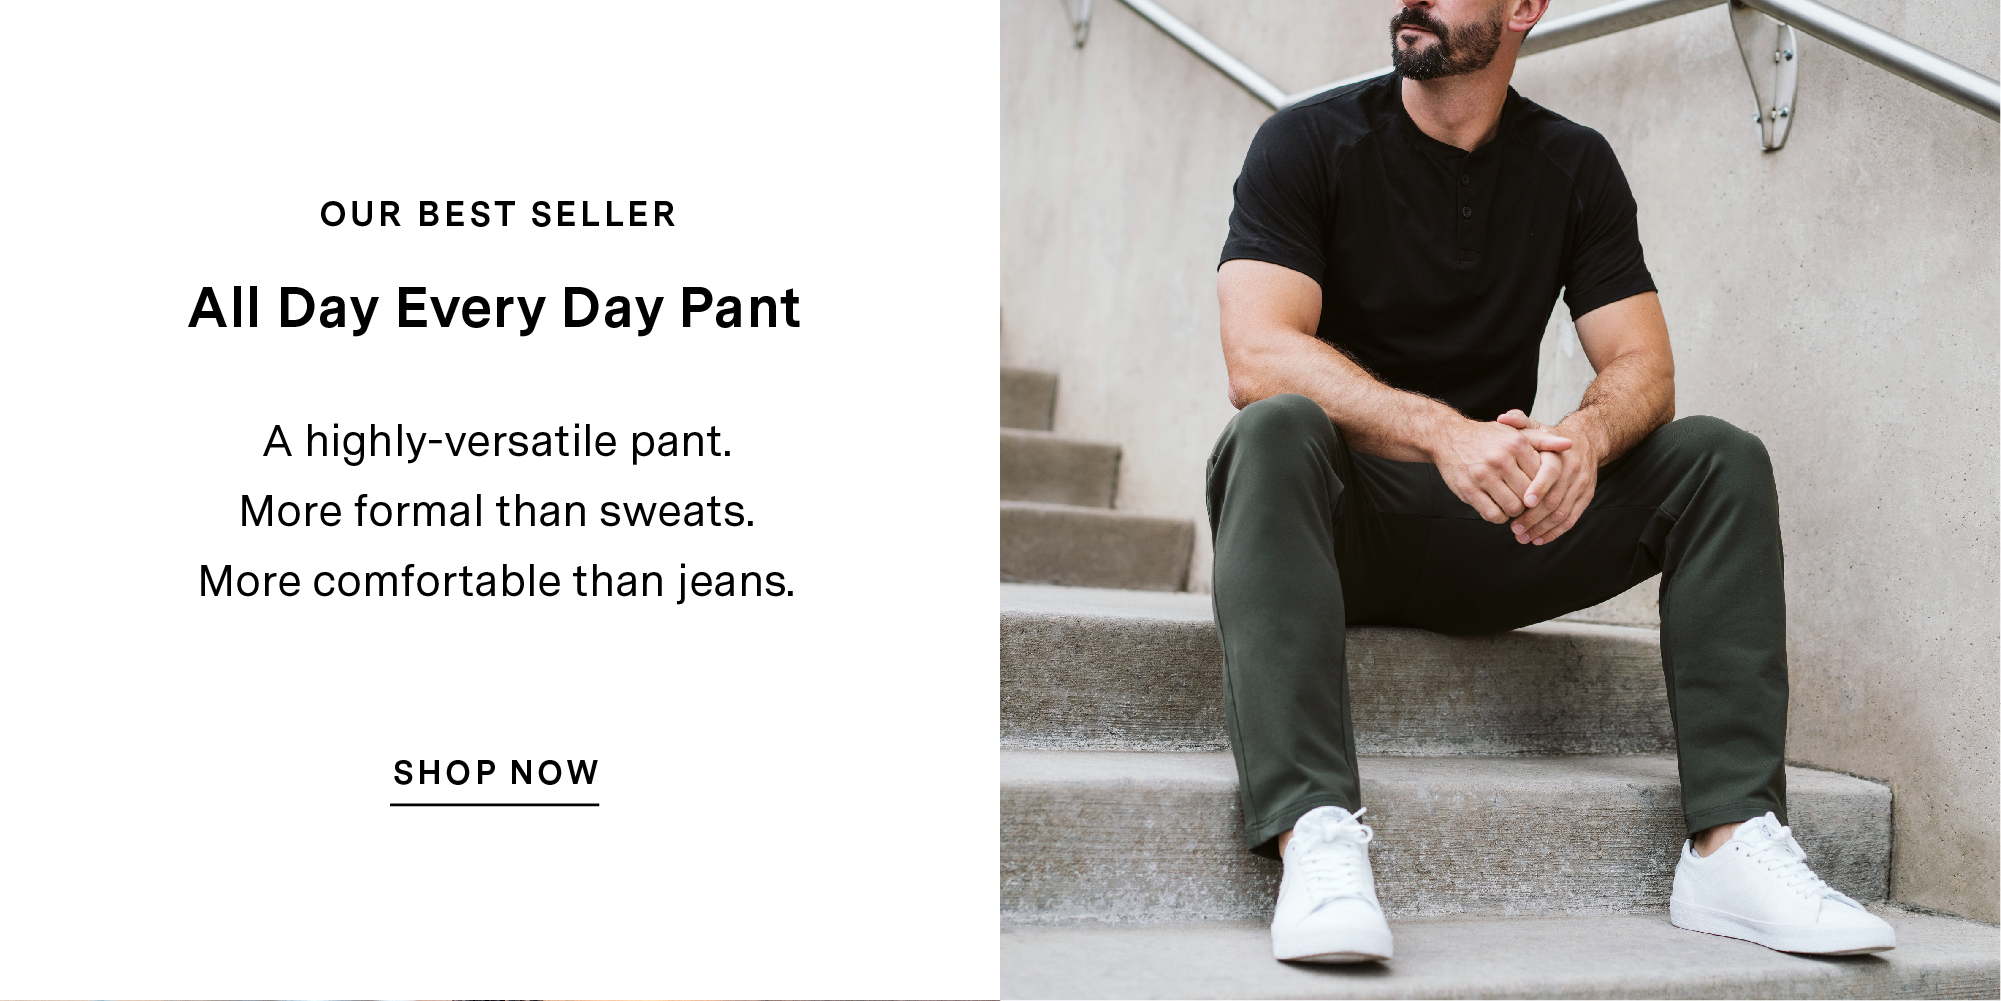 OUR BEST SELLER. All Day Every Day pant. A highly-versatile pant. More formal than sweats. More comfortable than jeans. SHOP NOW